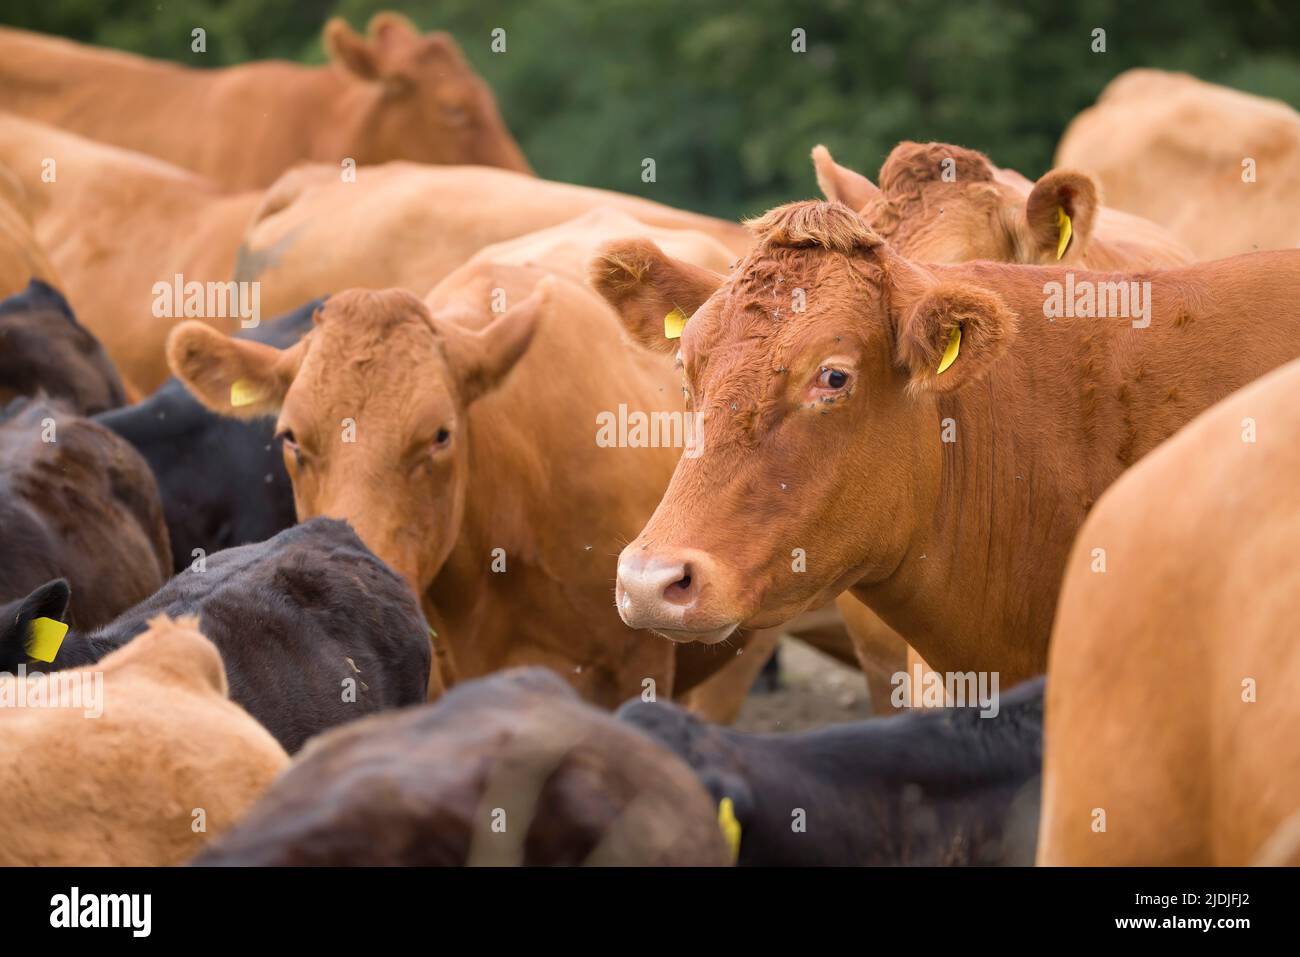 Herd of Hereford beef cattle with calves. Livestock in a field on a farm. Aylesbury Vale, Buckinghamshire, UK Stock Photo